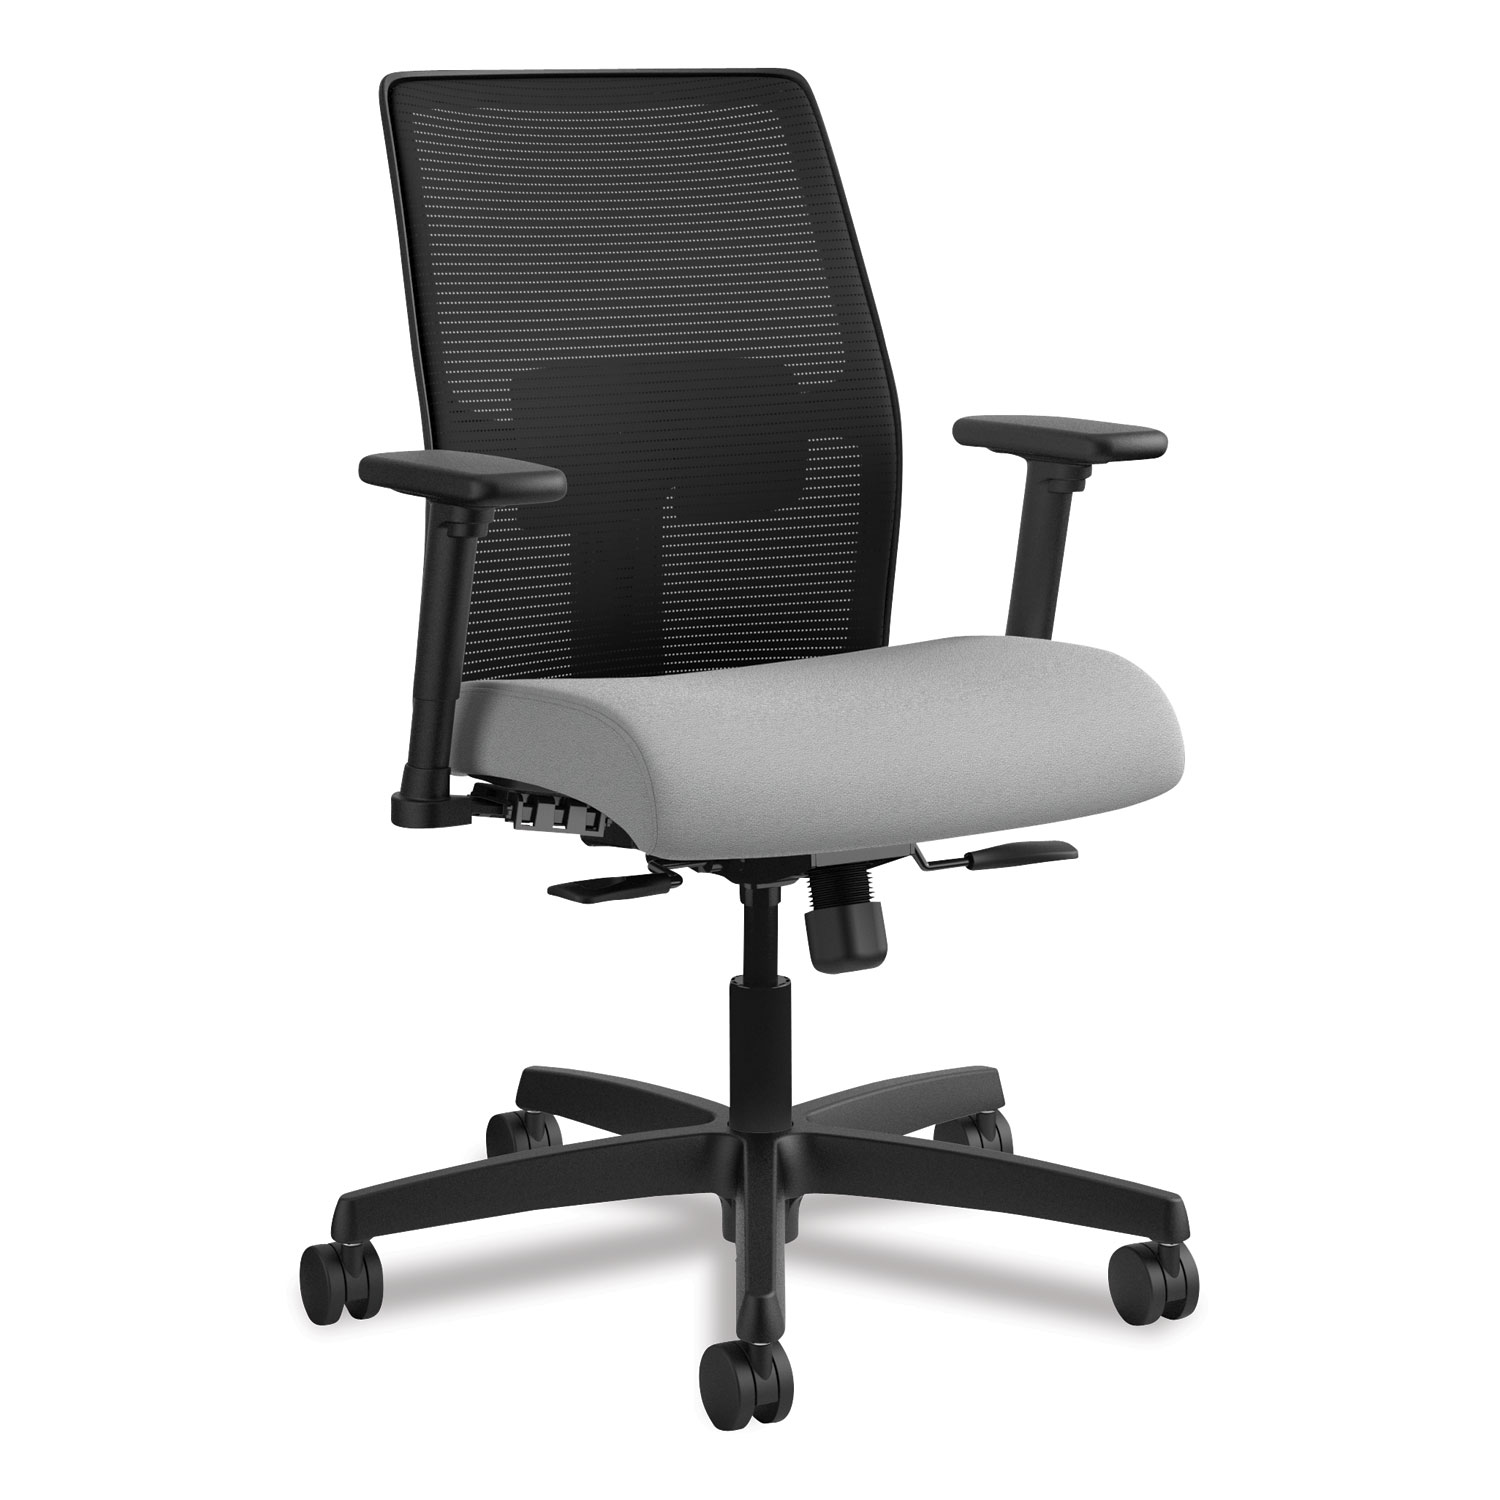  HON HONI2L1AMLC22TK Ignition 2.0 4-Way Stretch Low-Back Mesh Task Chair, Supports up to 300 lbs., Frost Seat, Black Back, Black Base (HONI2L1AMLC22TK) 